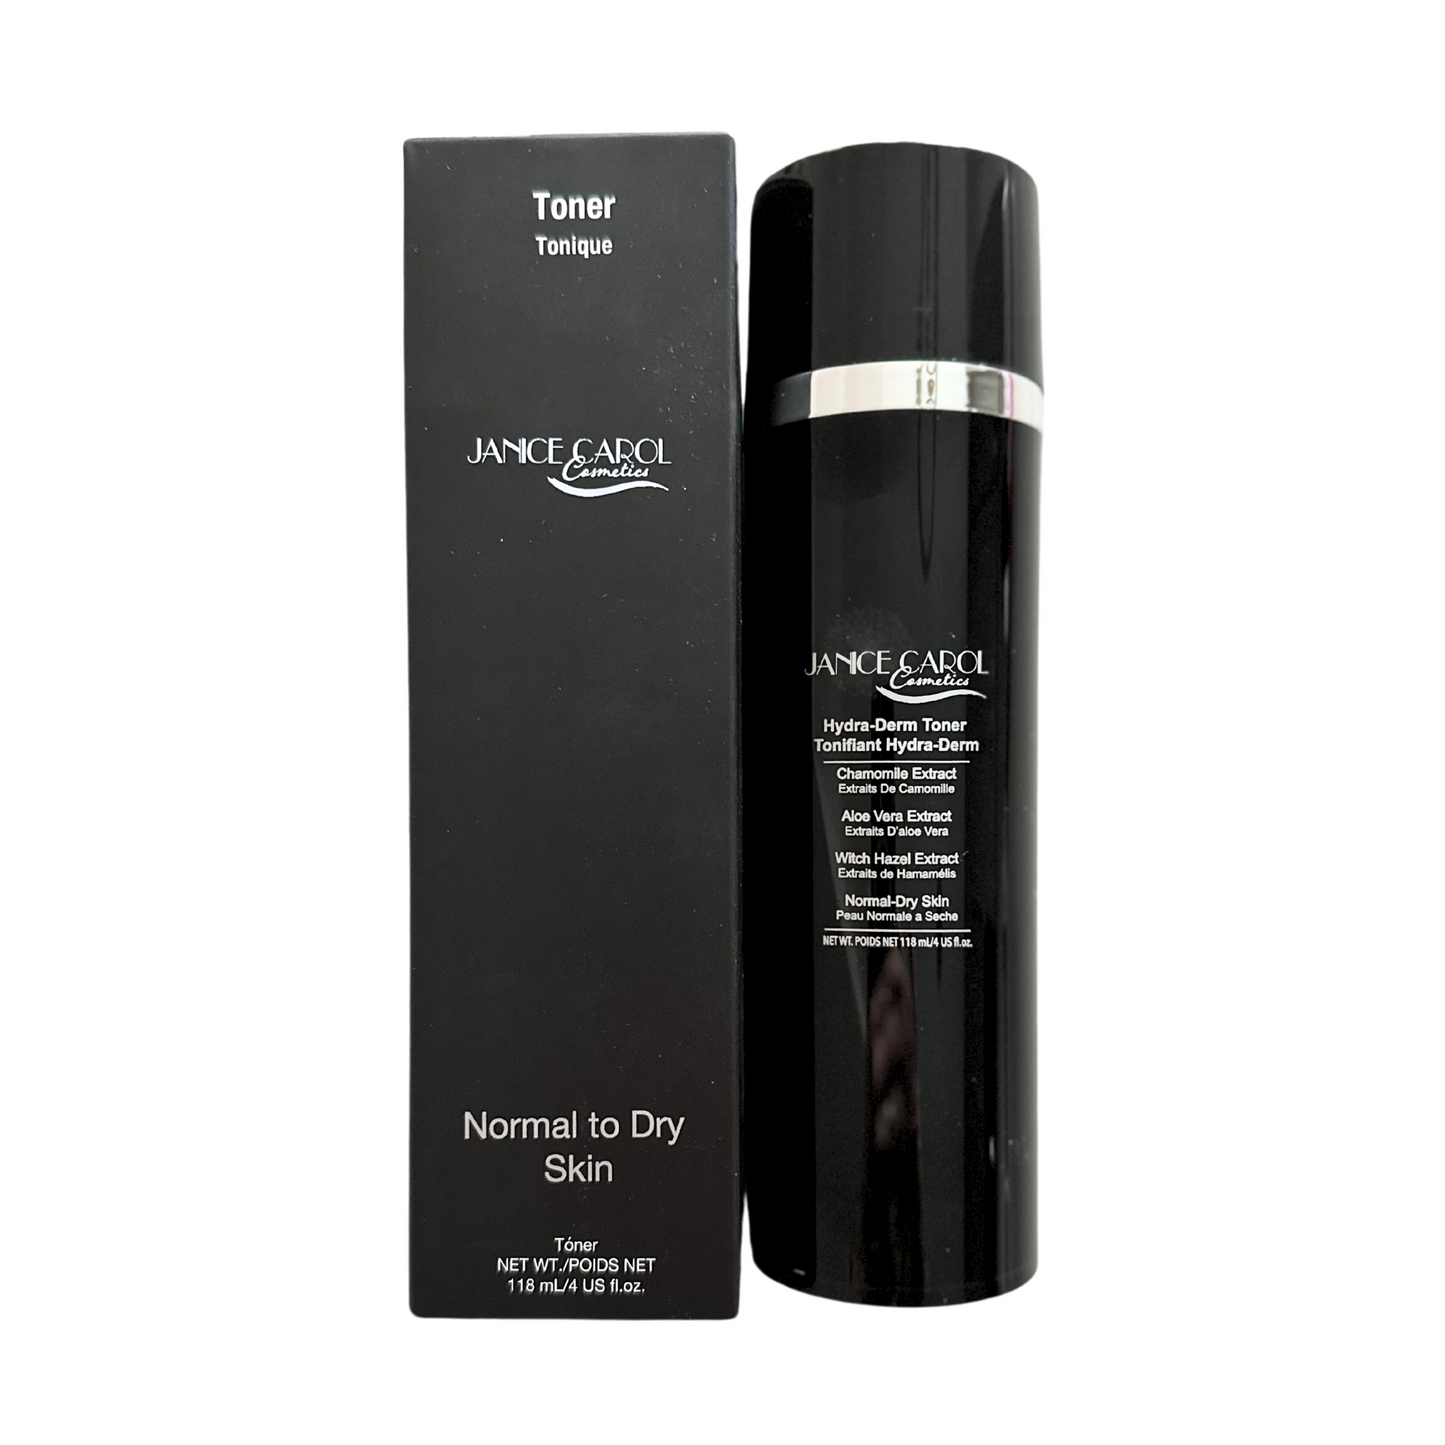 HYDRA-DERM TONER-for normal to dry skin